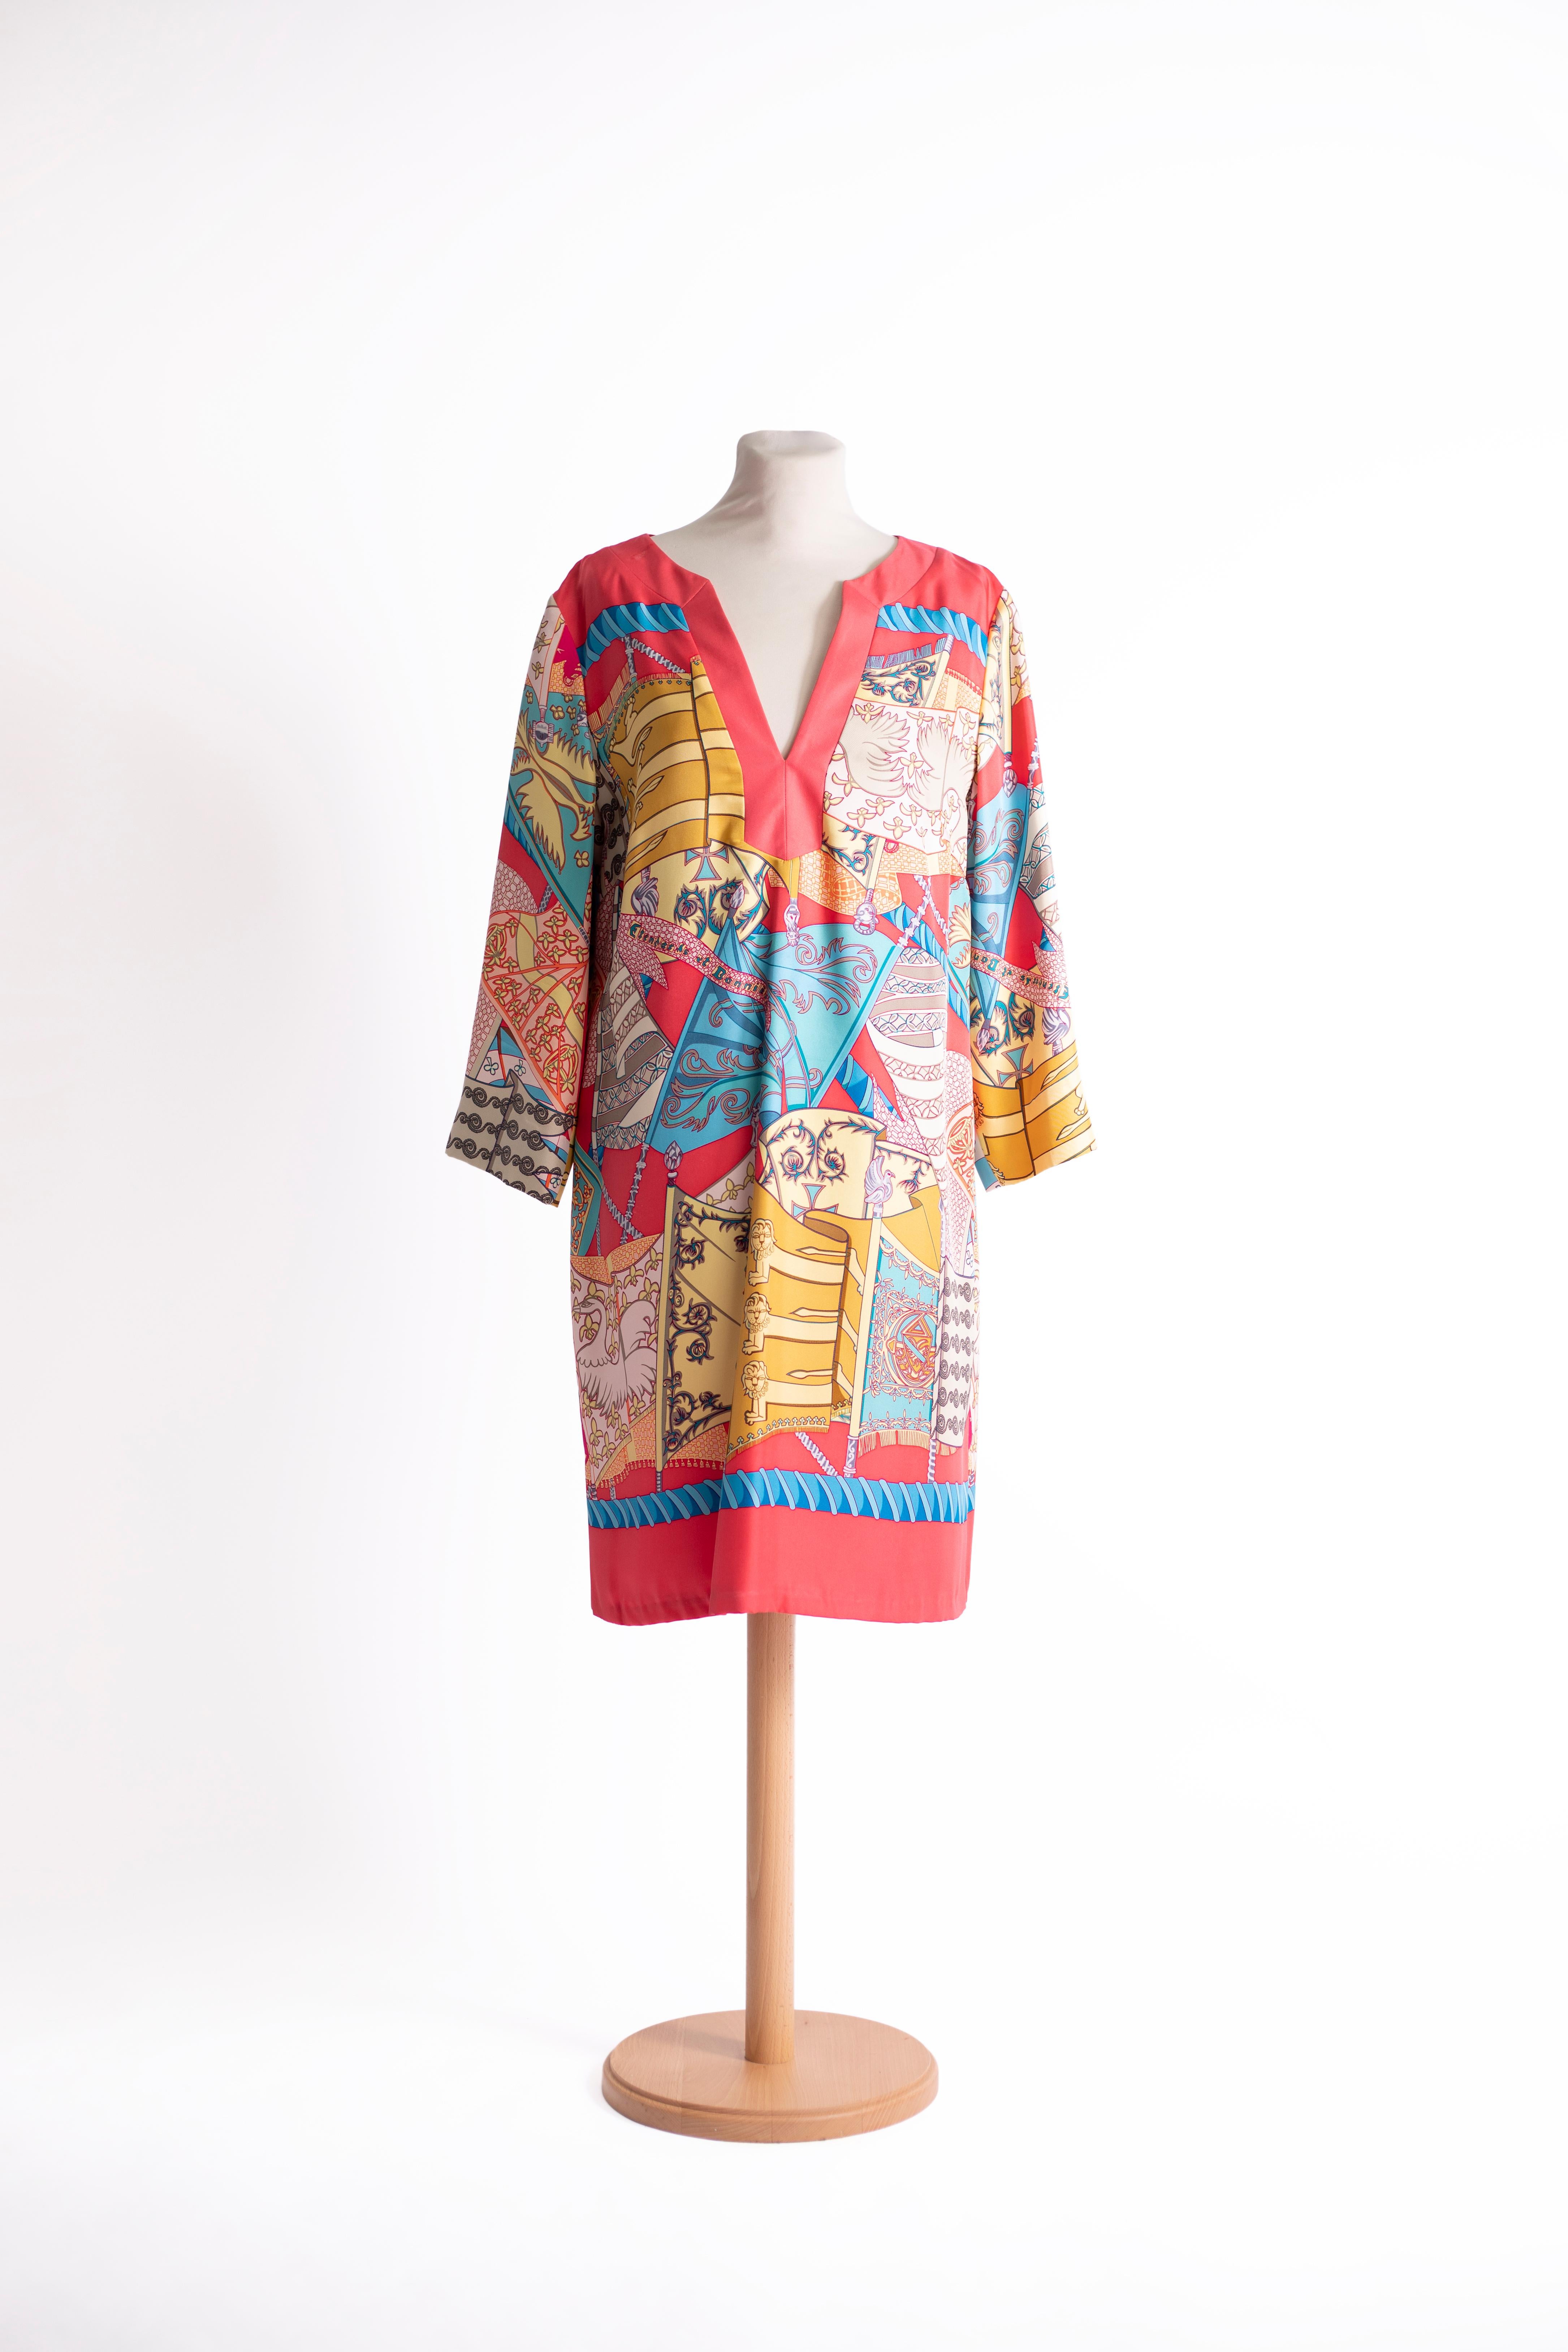 J. Mc. Laughlin Kaftan style dress, knee length with long sleeves, V-neck. Fantasy print in bright colors.

Size IT: M
Size USA: M

MEASURES
Waist: OVERSIZED
Length: 94 CM
Bust: 100 CM